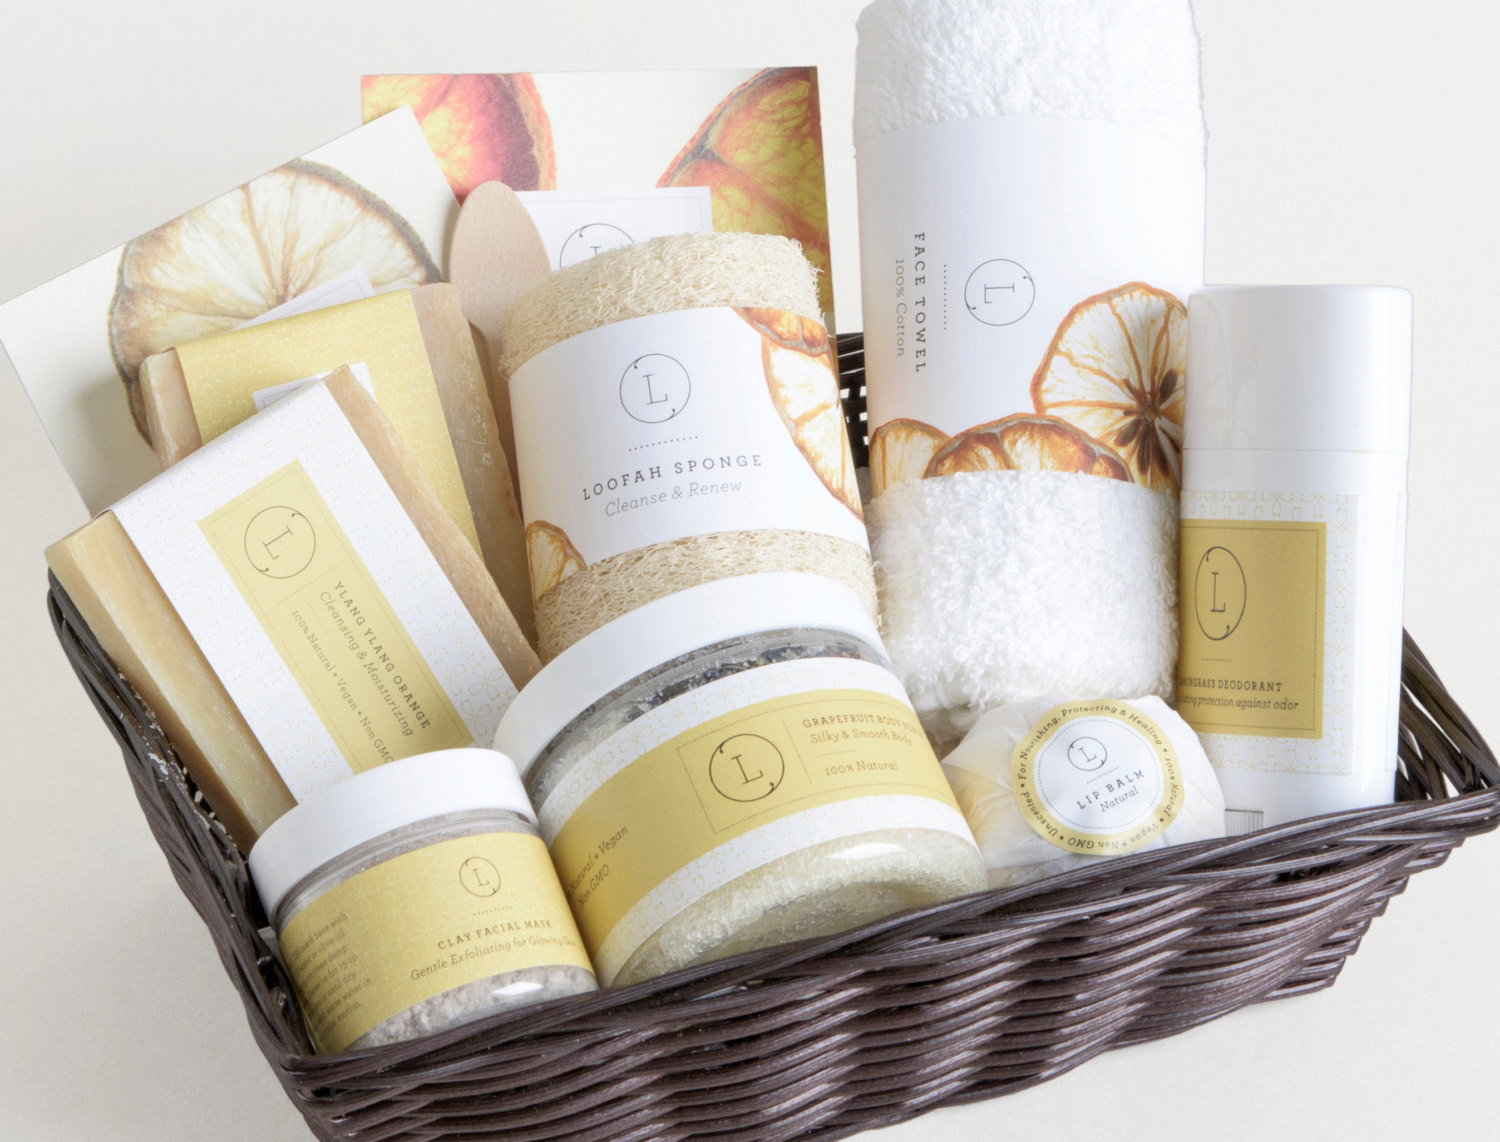 Spa Gift Basket Ideas
 Top 10 Mother s Day Gift Basket ideas for healthy moms